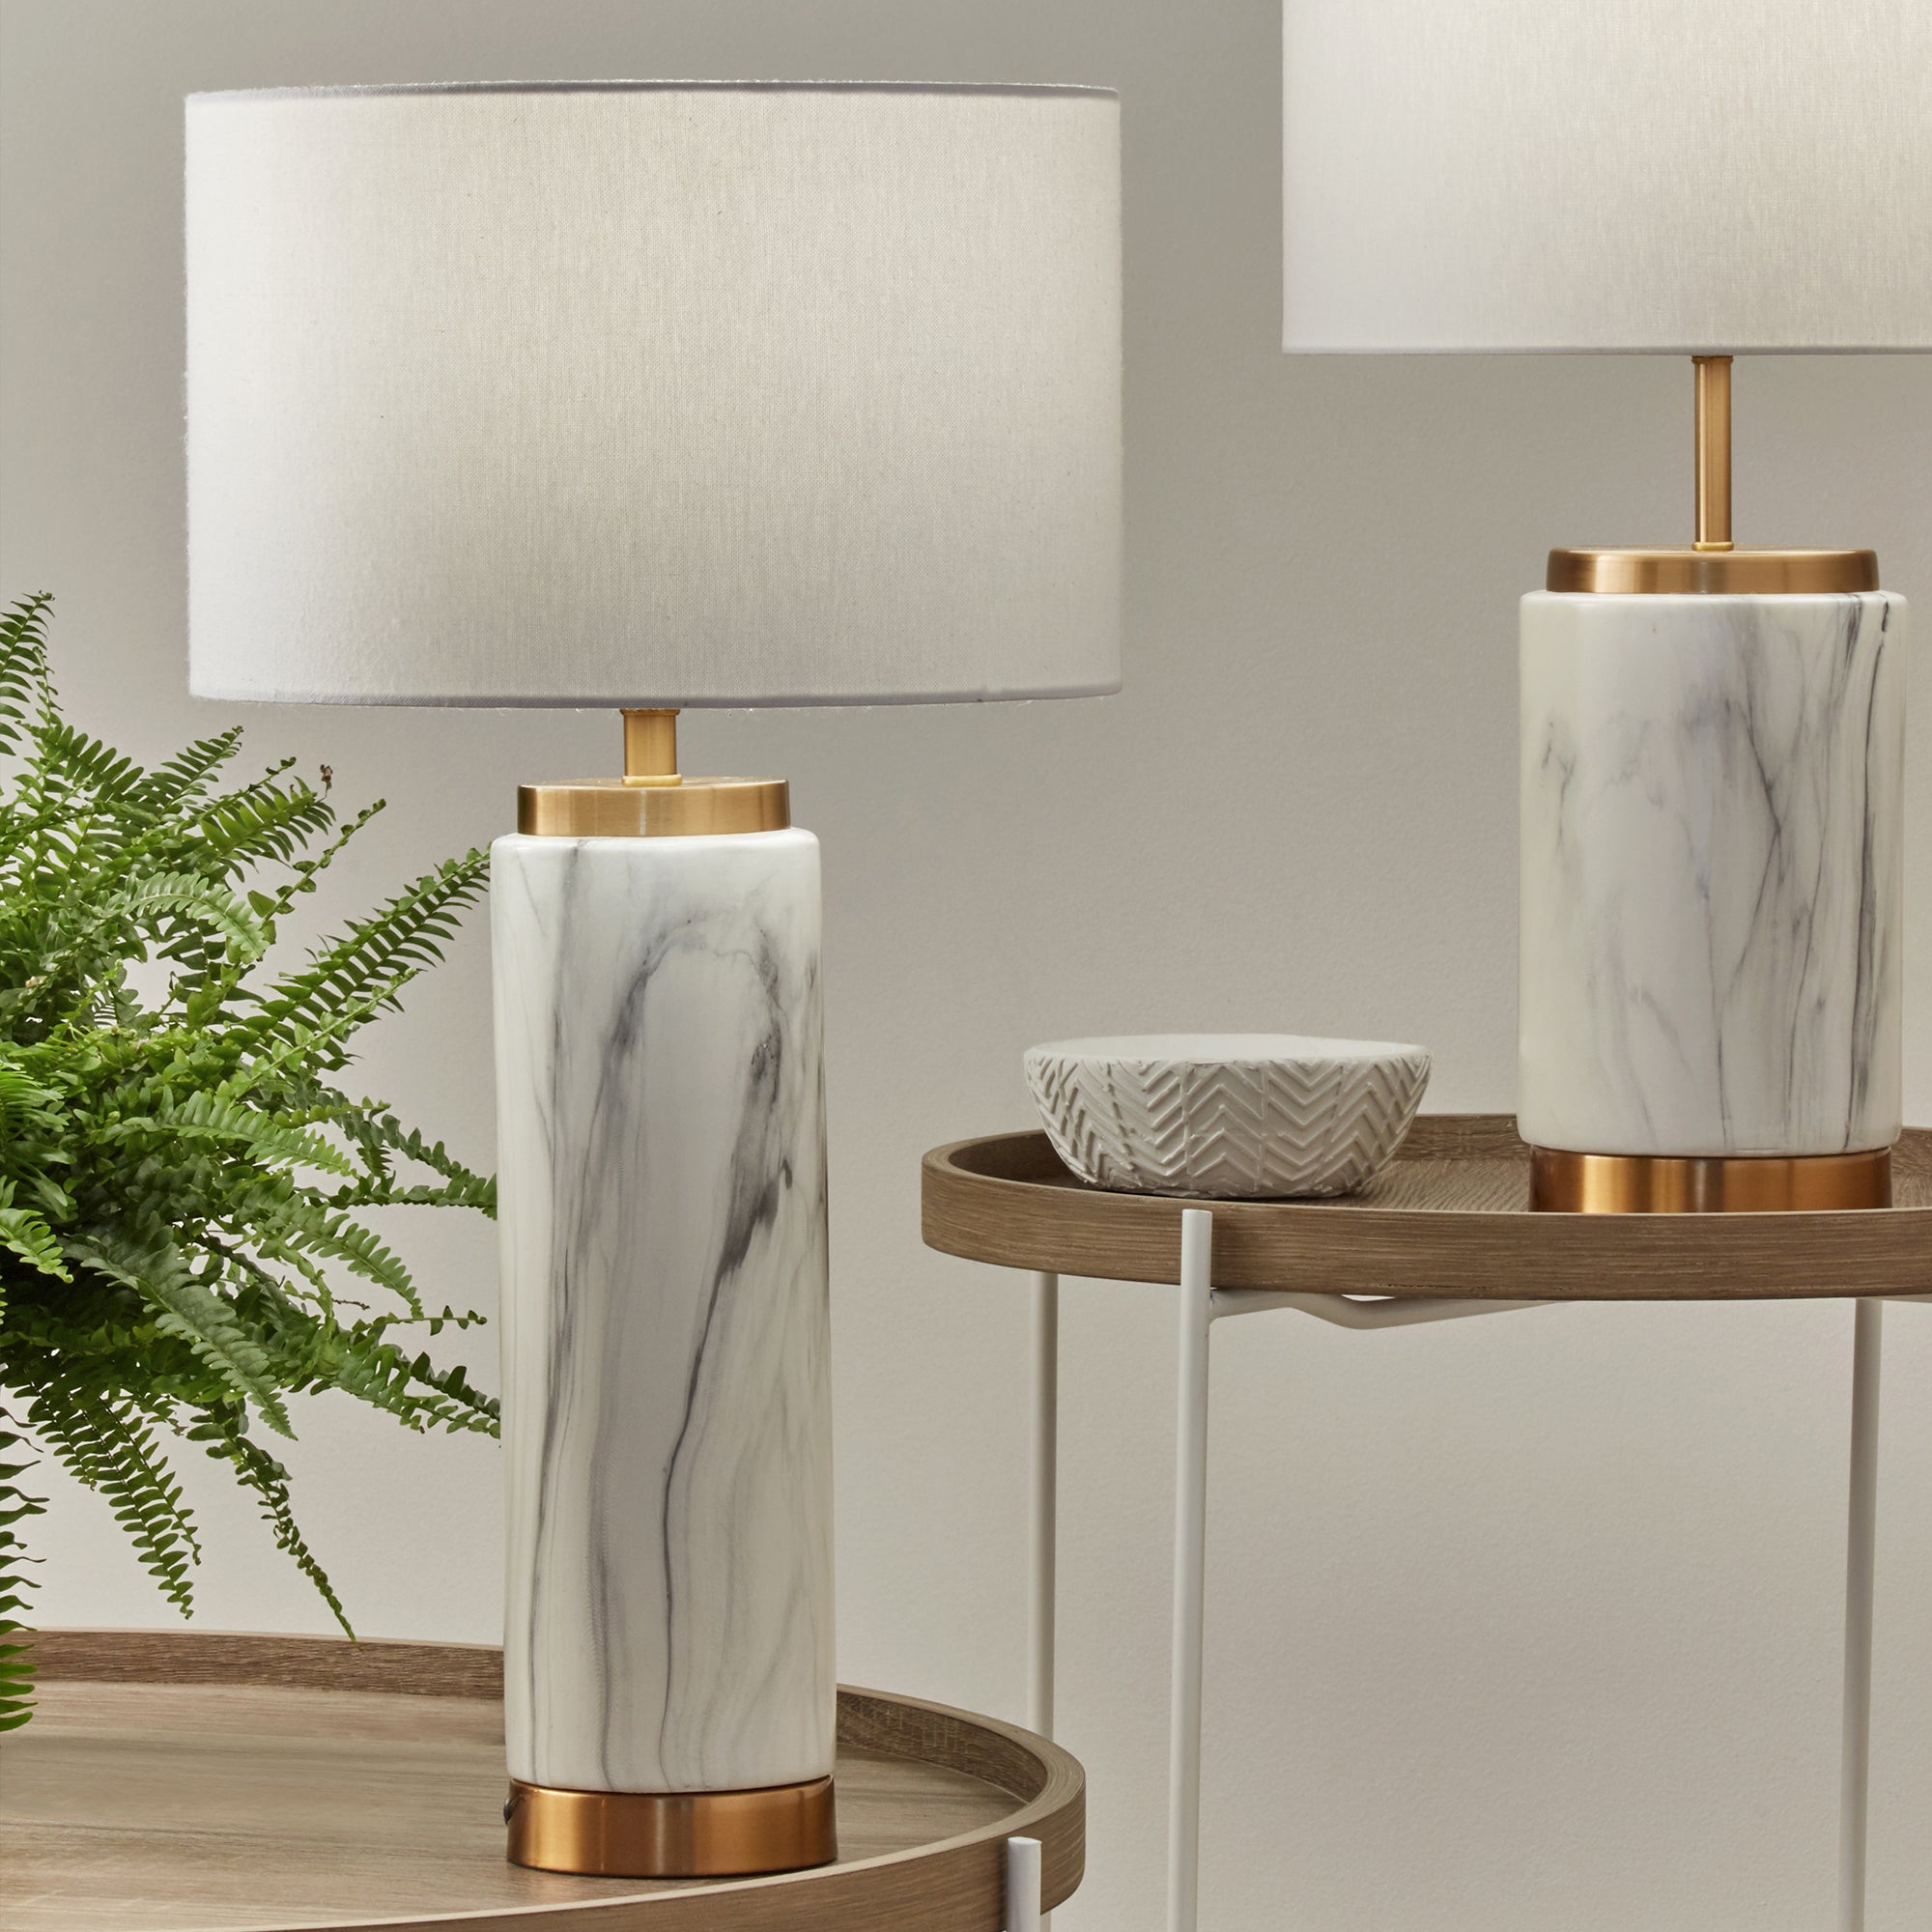 Pacific Lifestyle Carrara Table Lamp Marble Effect 